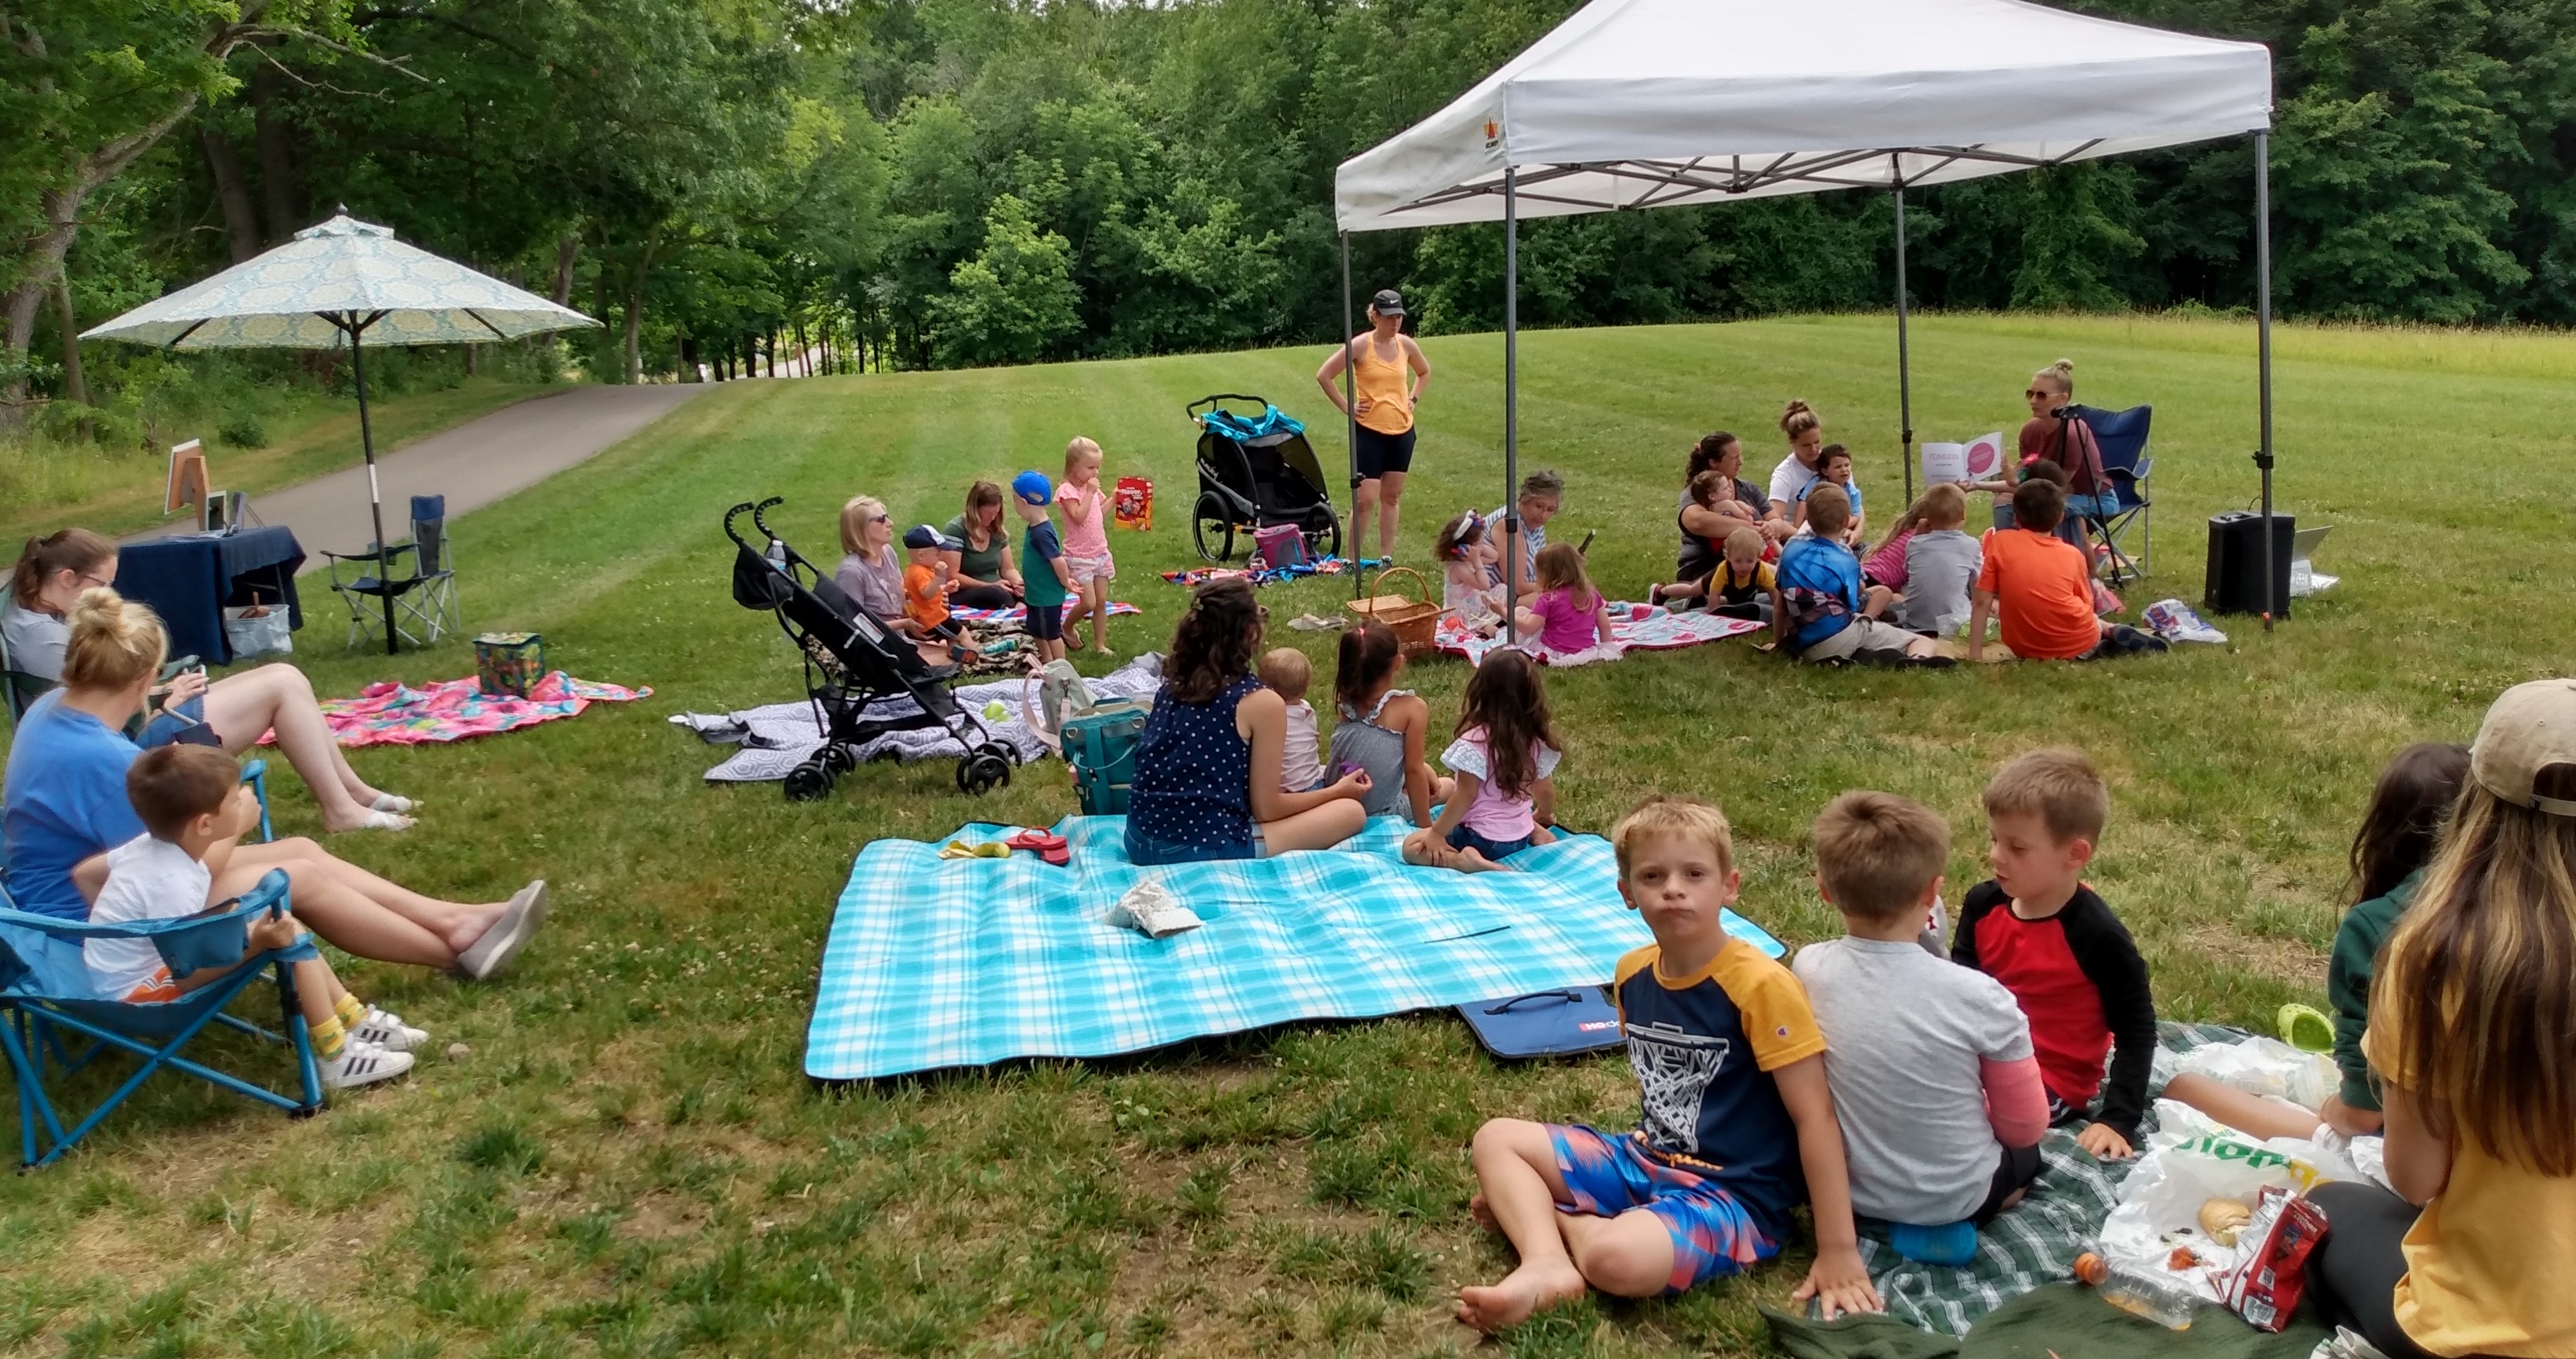 large group of people with children, seated on a grassy lawn with blankets and popup tents. One adult is reading a storybook.